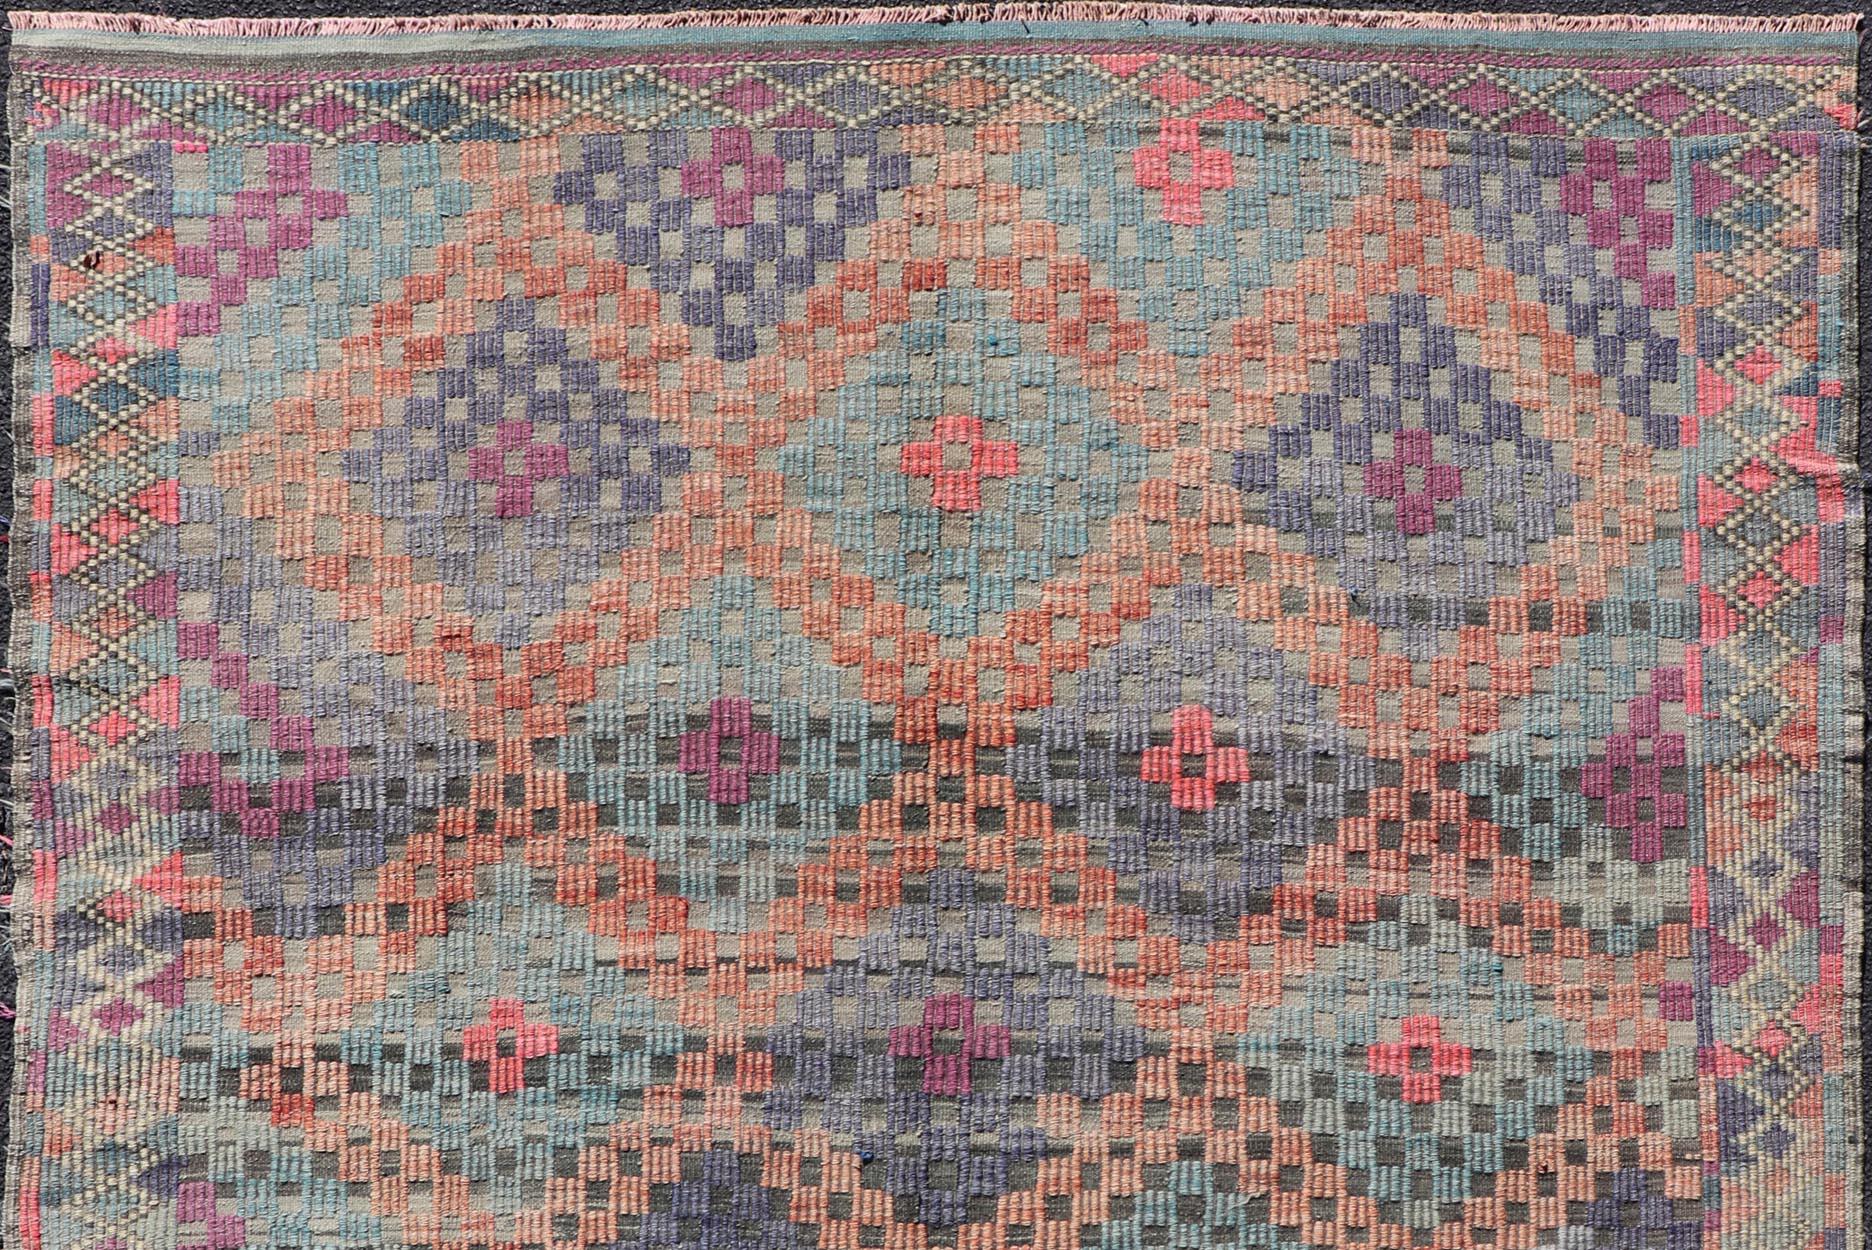 Measures: 6'5 x 7'1 
Turkish Vintage Kilim with All-Over Geometric Diamond Design in Multicolor. Keivan Woven Arts / rug TU-NED-4696, country of origin / type: Turkey / Kilim, circa Mid-20th Century.
This geometric embroidered flat weave from Turkey